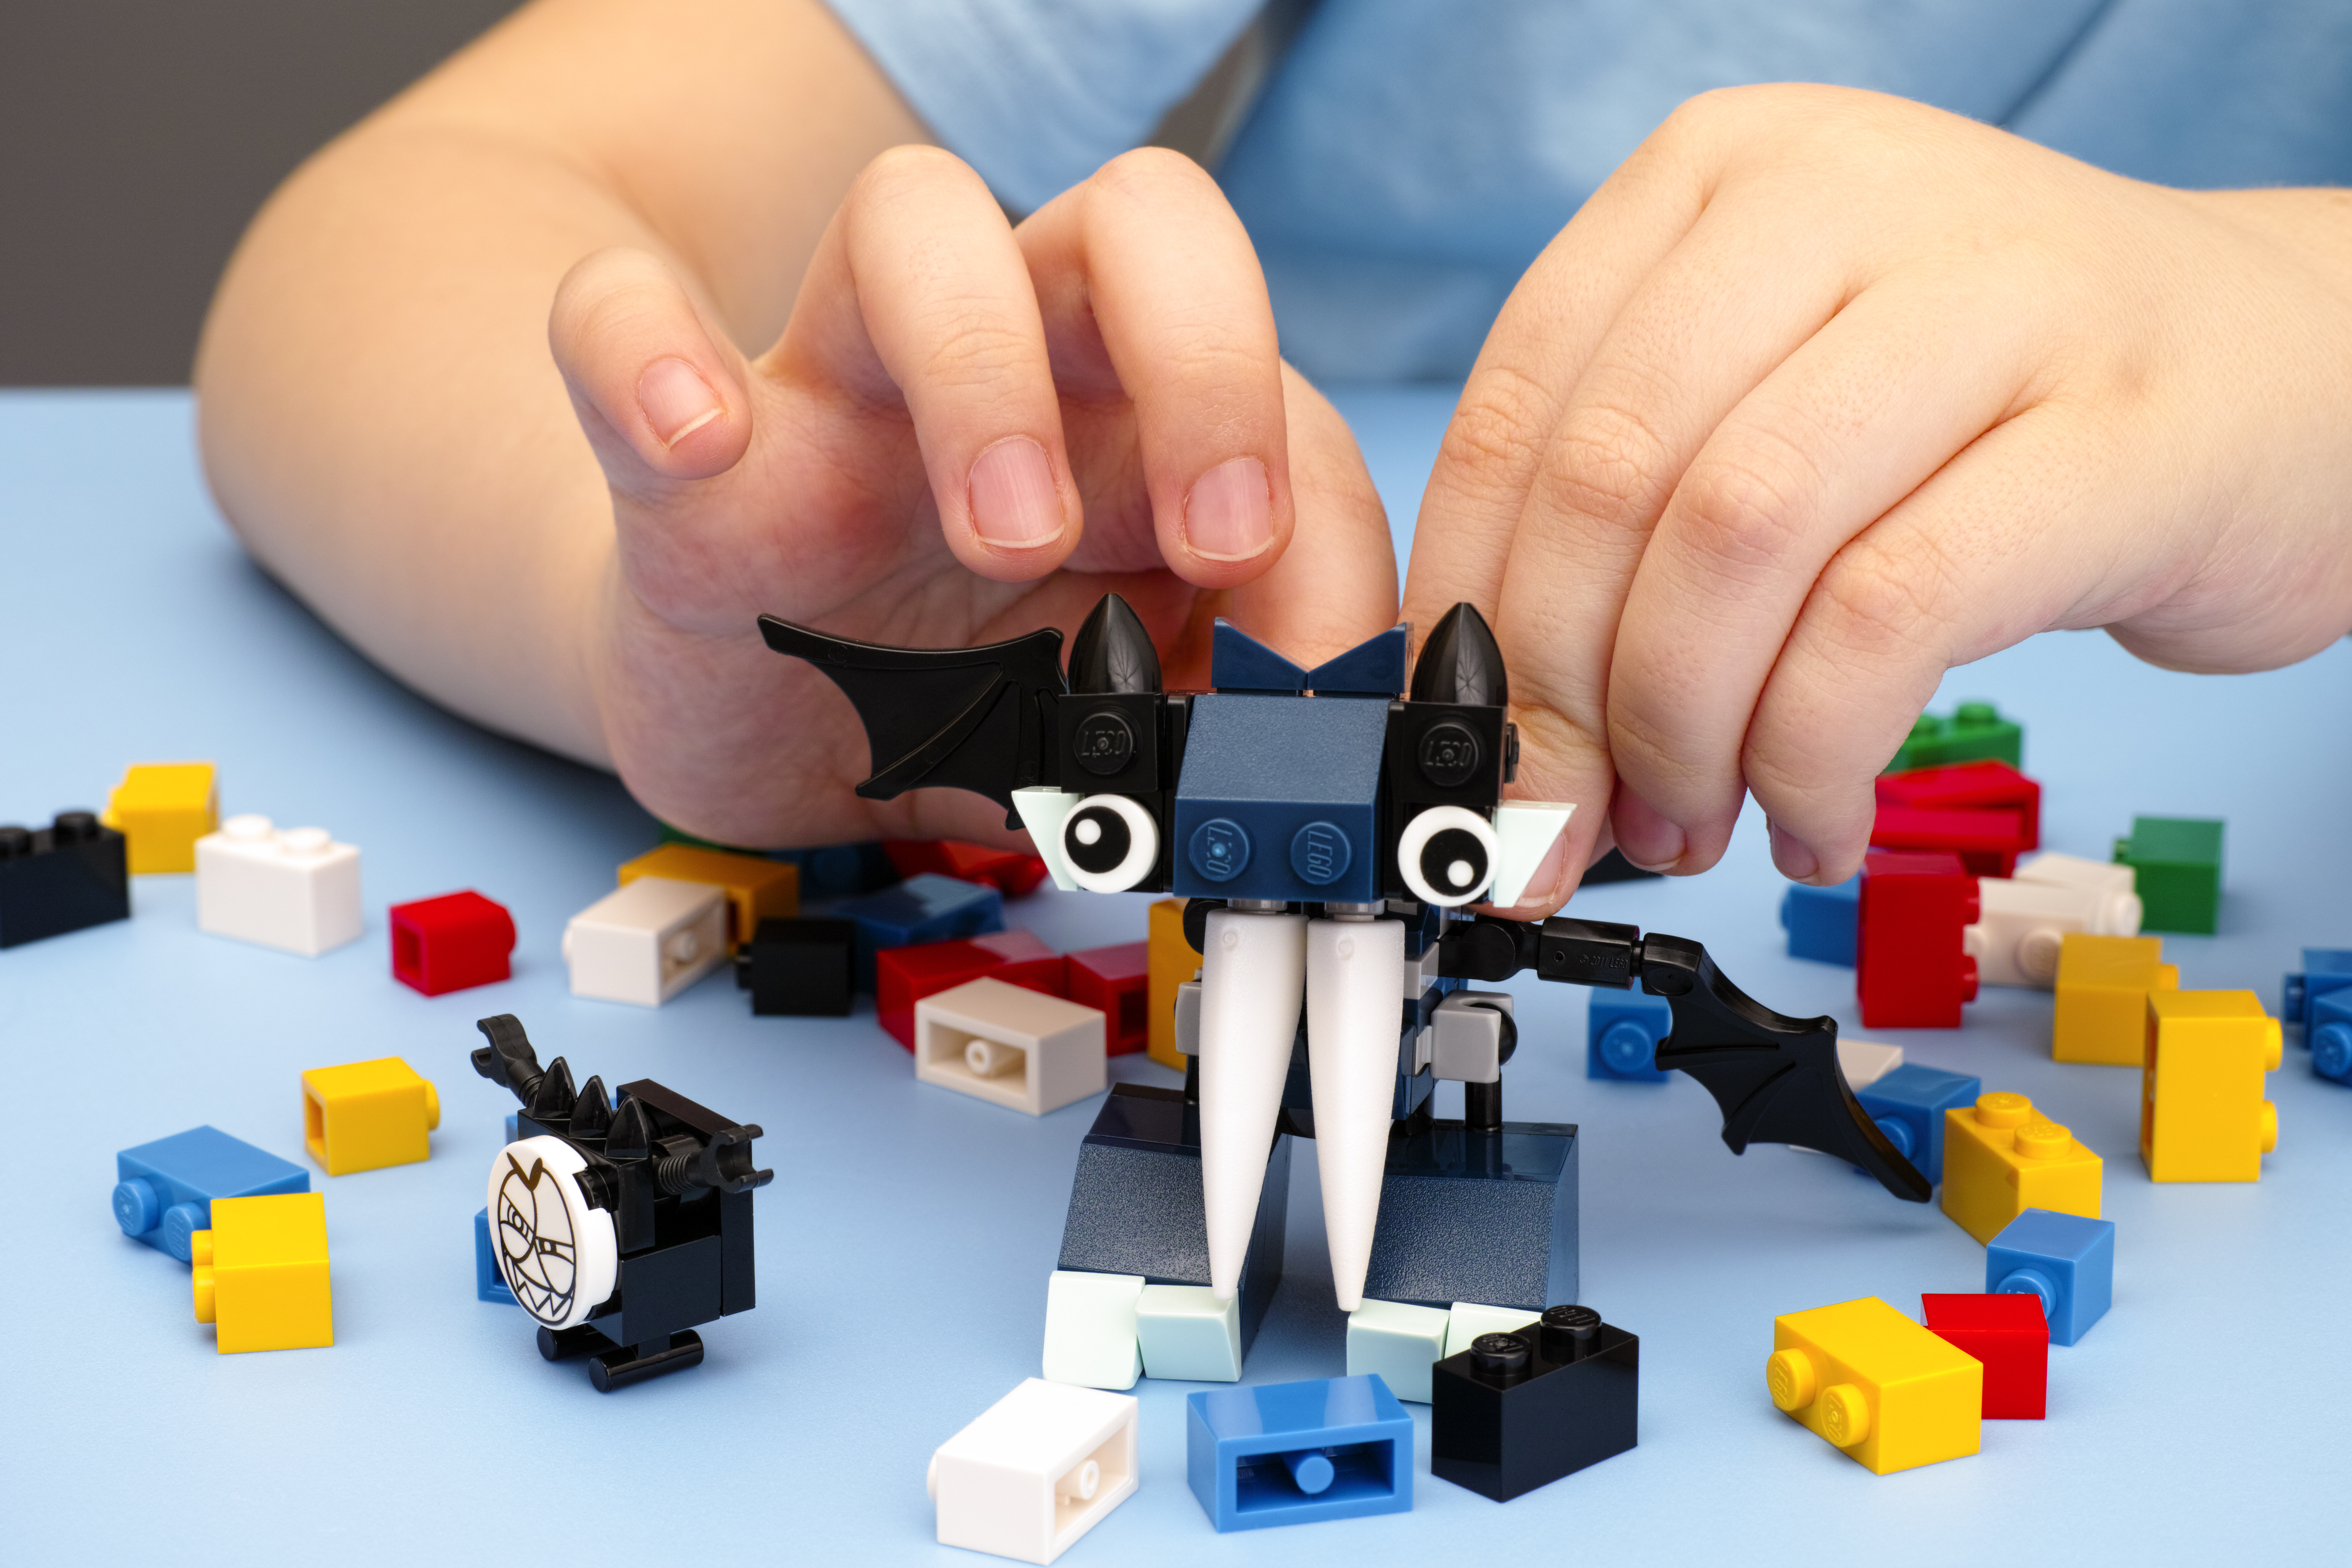 Holiday Gift Ideas: Lego Sets for Girls for Any Budget • The Simple Parent